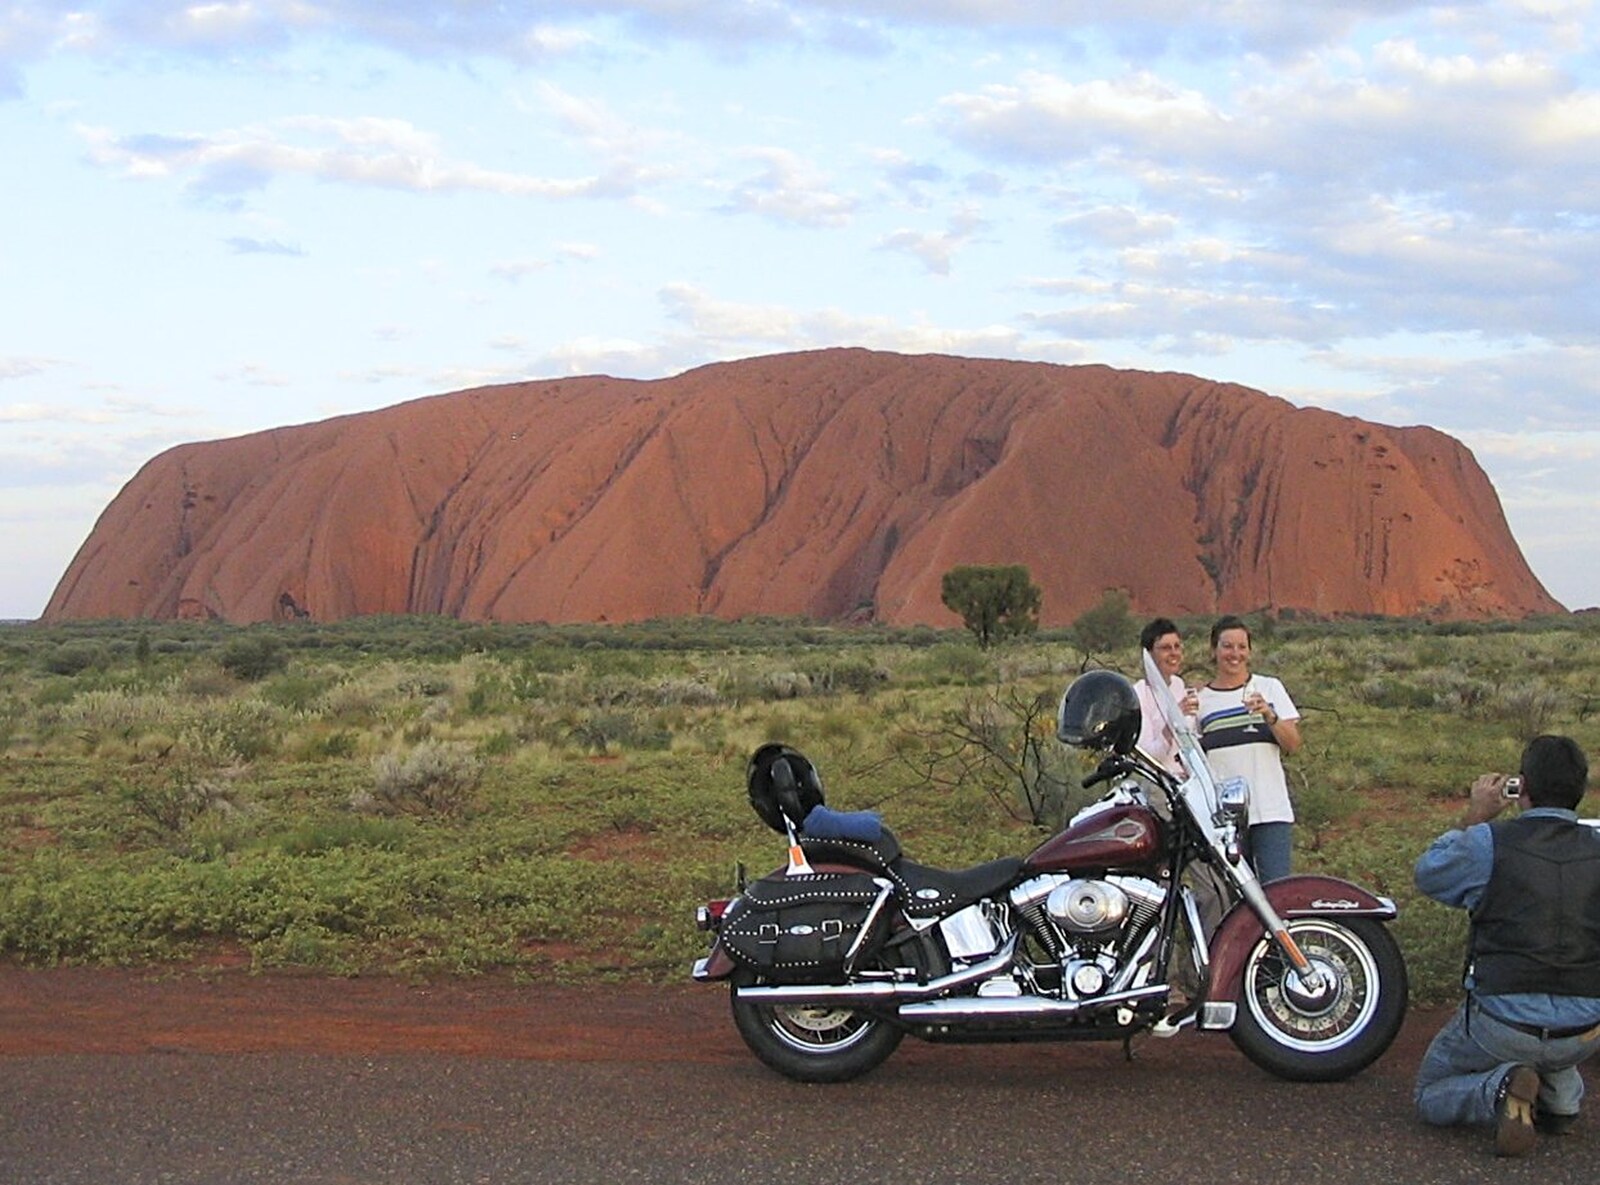 A photo in front of Uluru from The Red Centre: Yulara and Uluru, Northern Territories, Australia - 8th October 2004